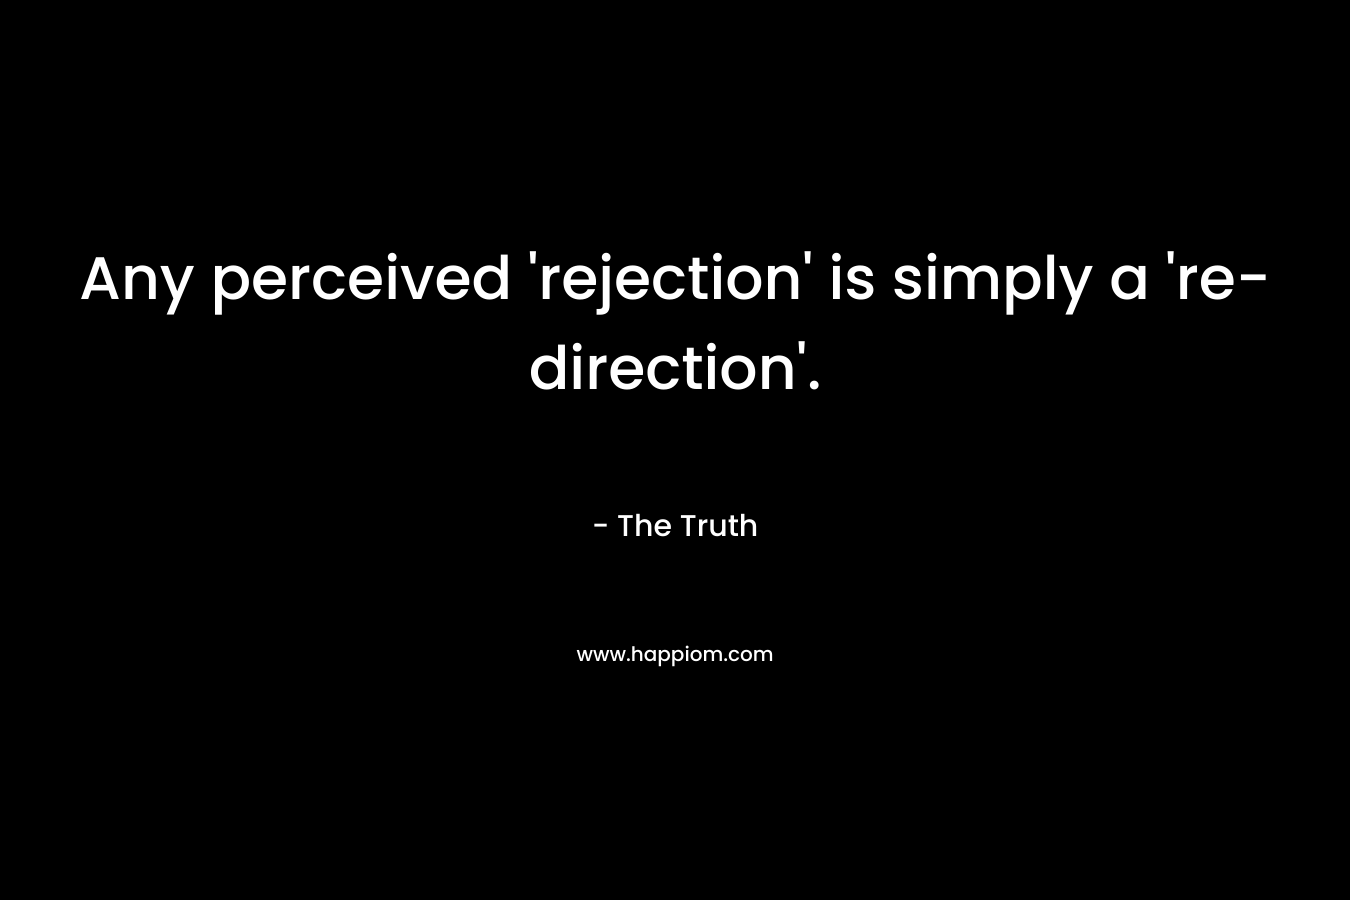 Any perceived 'rejection' is simply a 're-direction'.